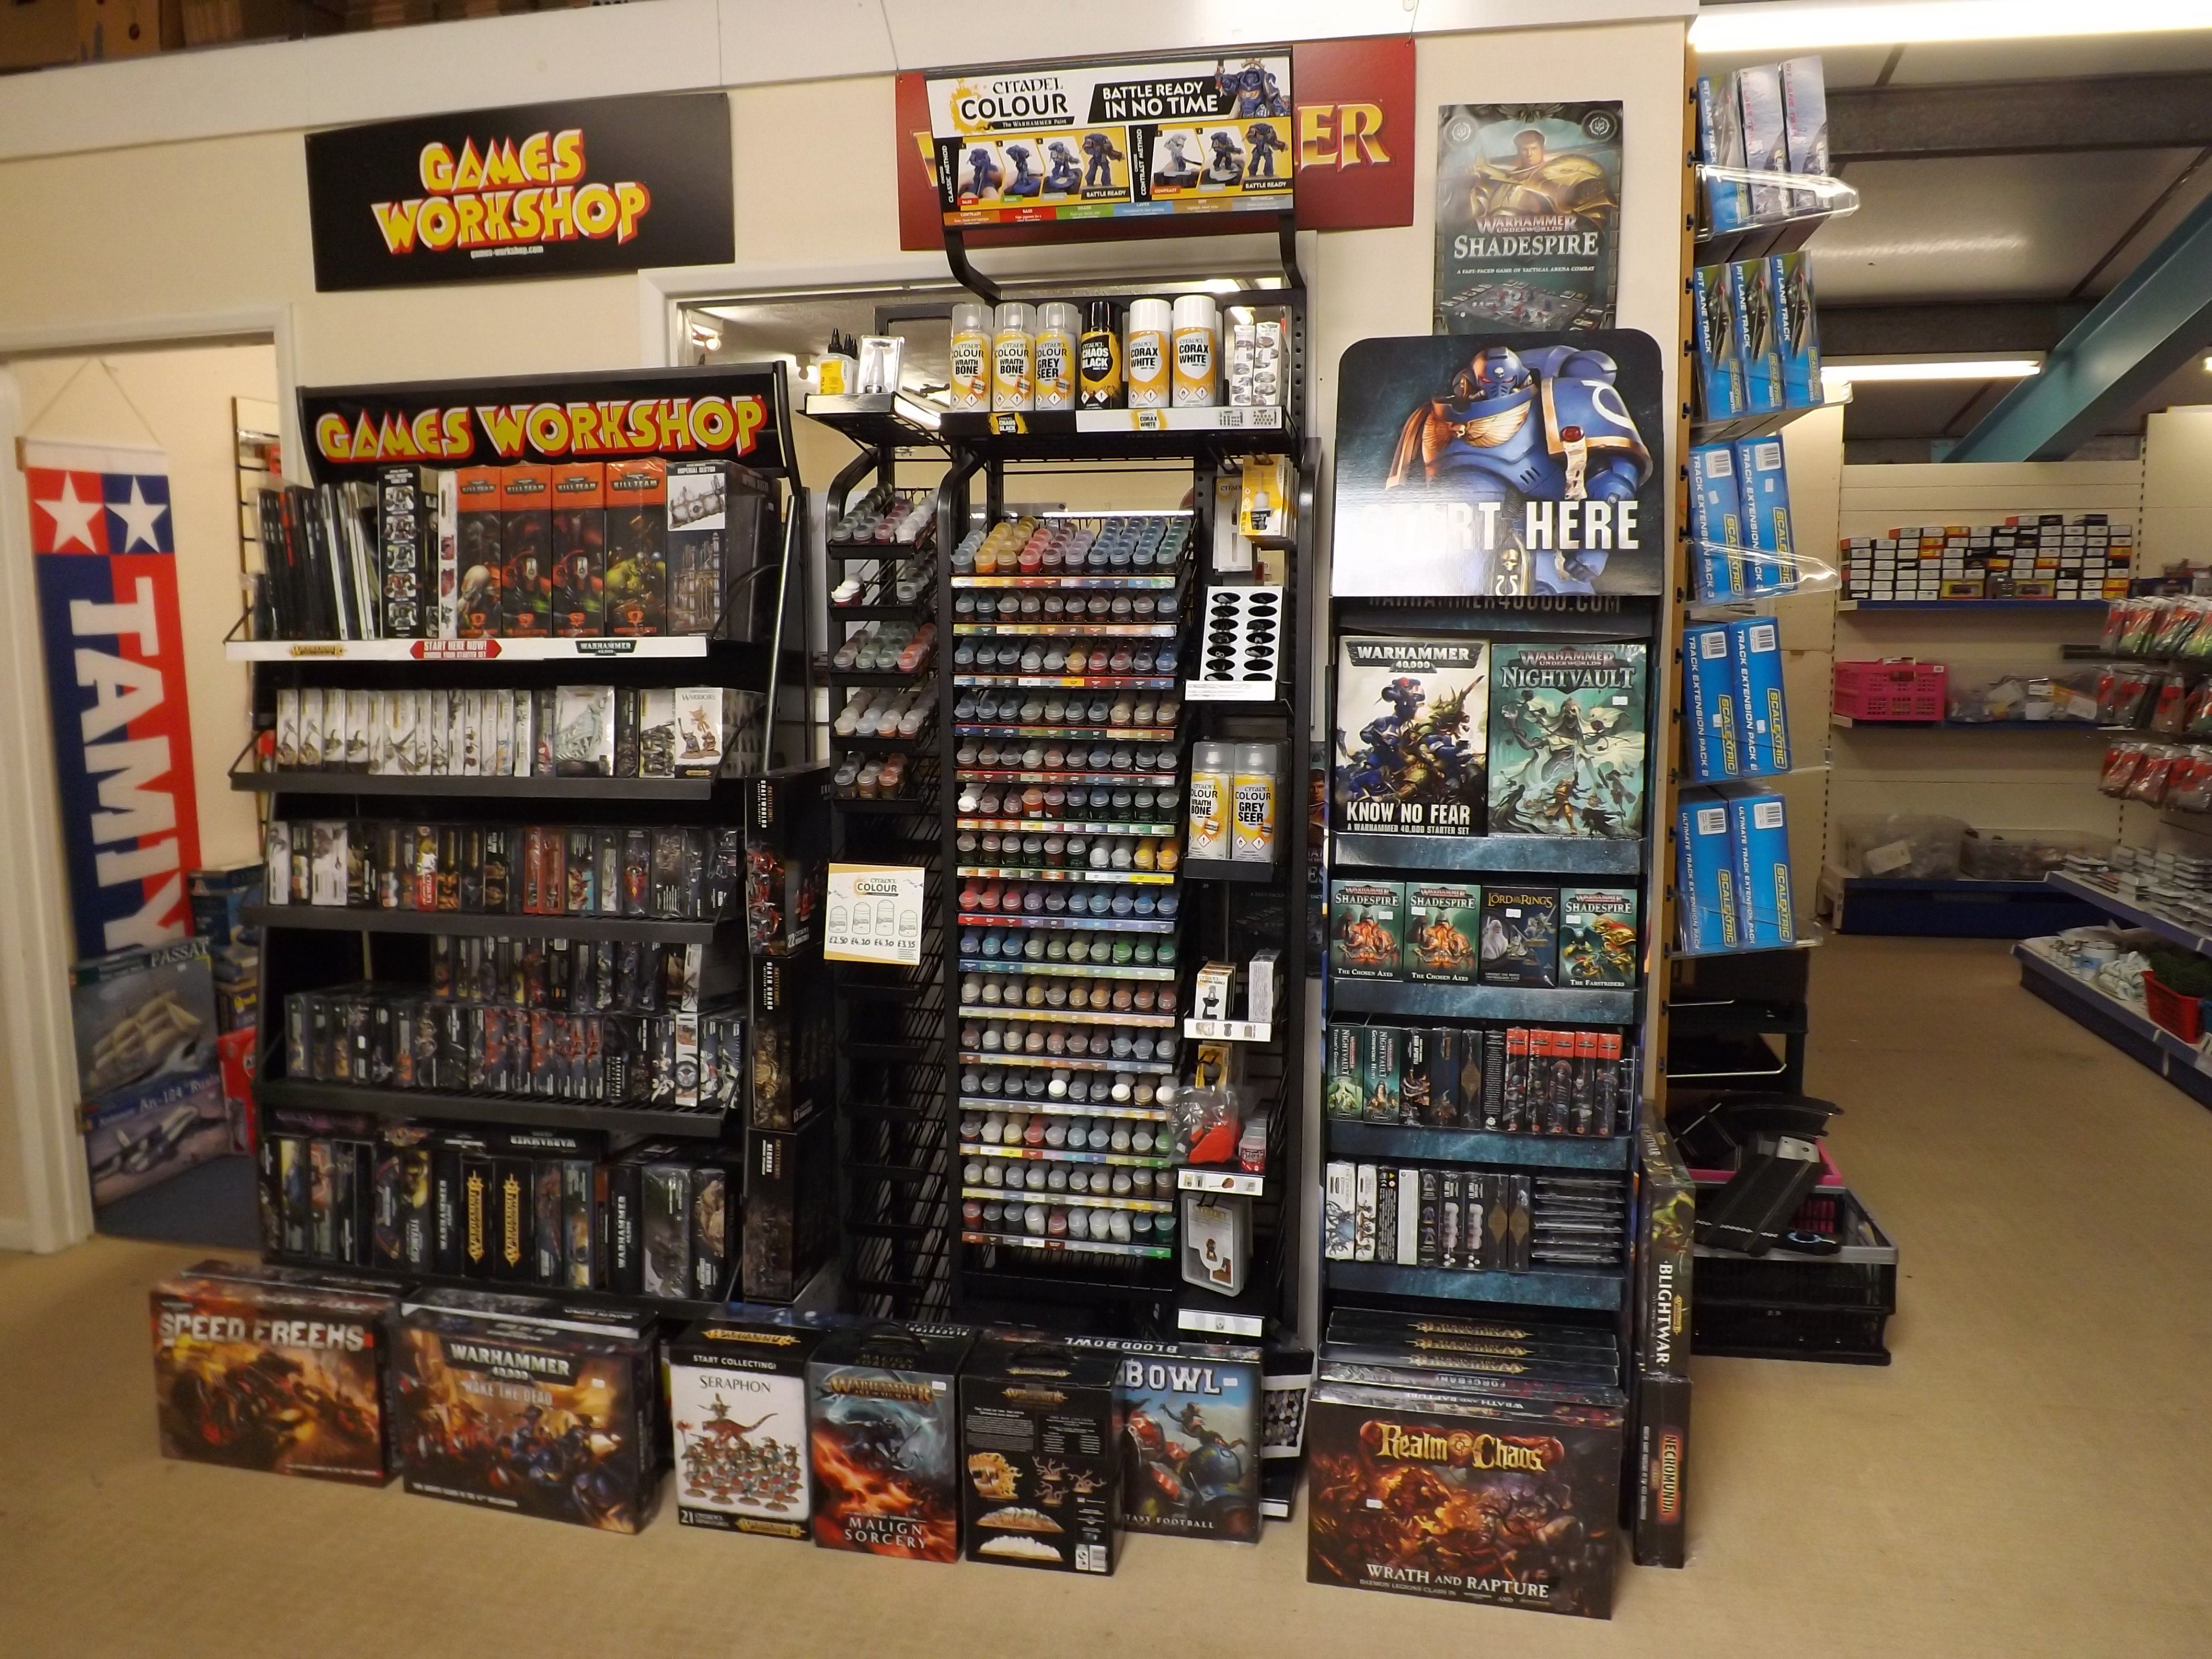 Trains4U on X: Our new Games Workshop paint stand has arrived! We